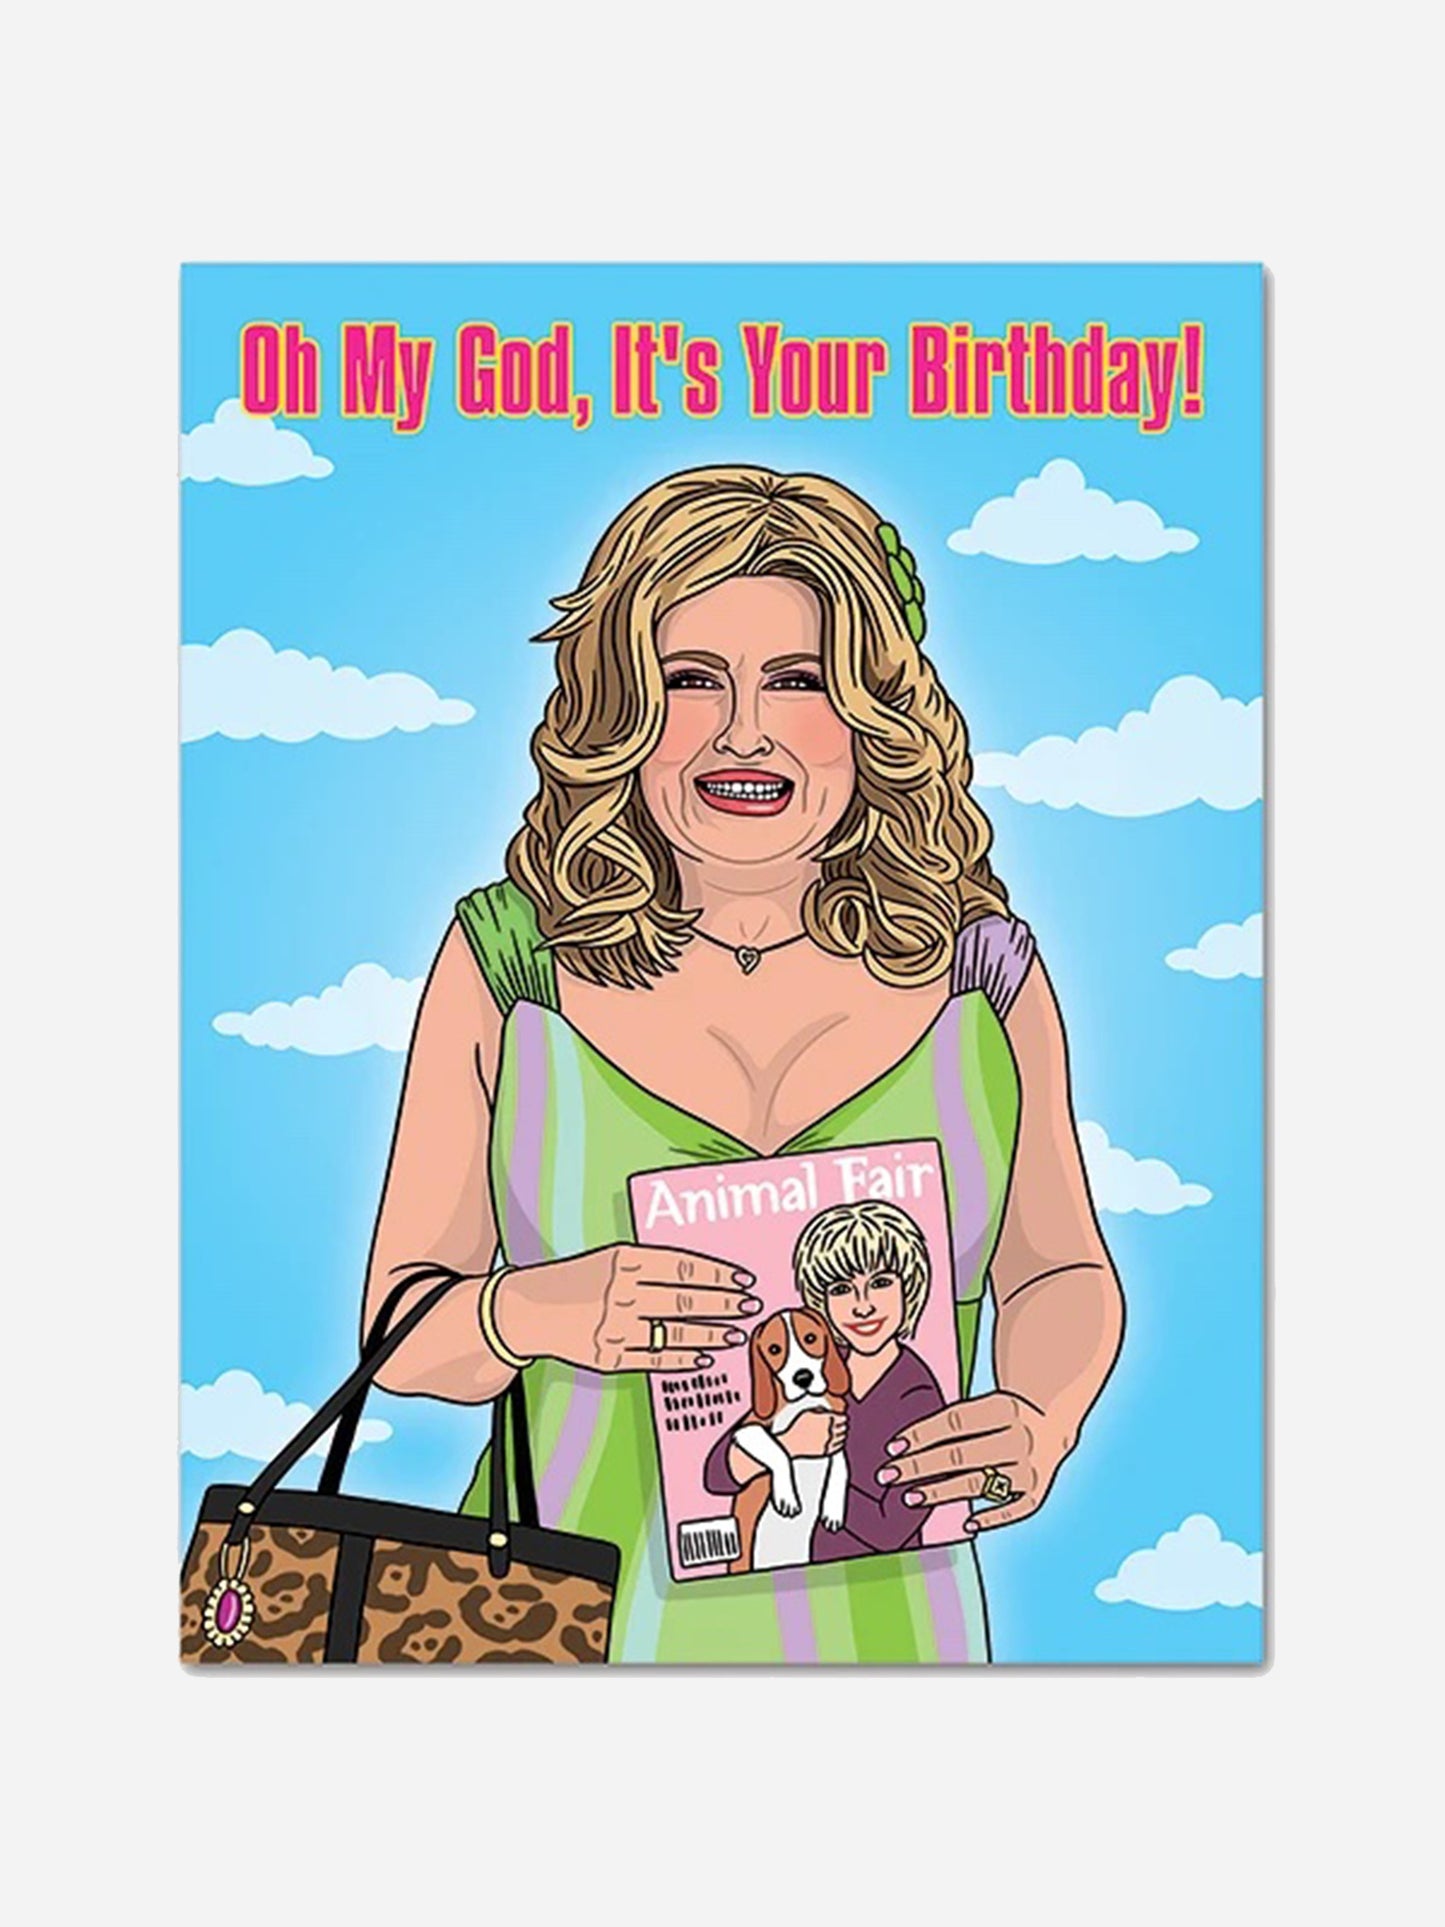 The Found Oh My God, It's Your Birthday Card